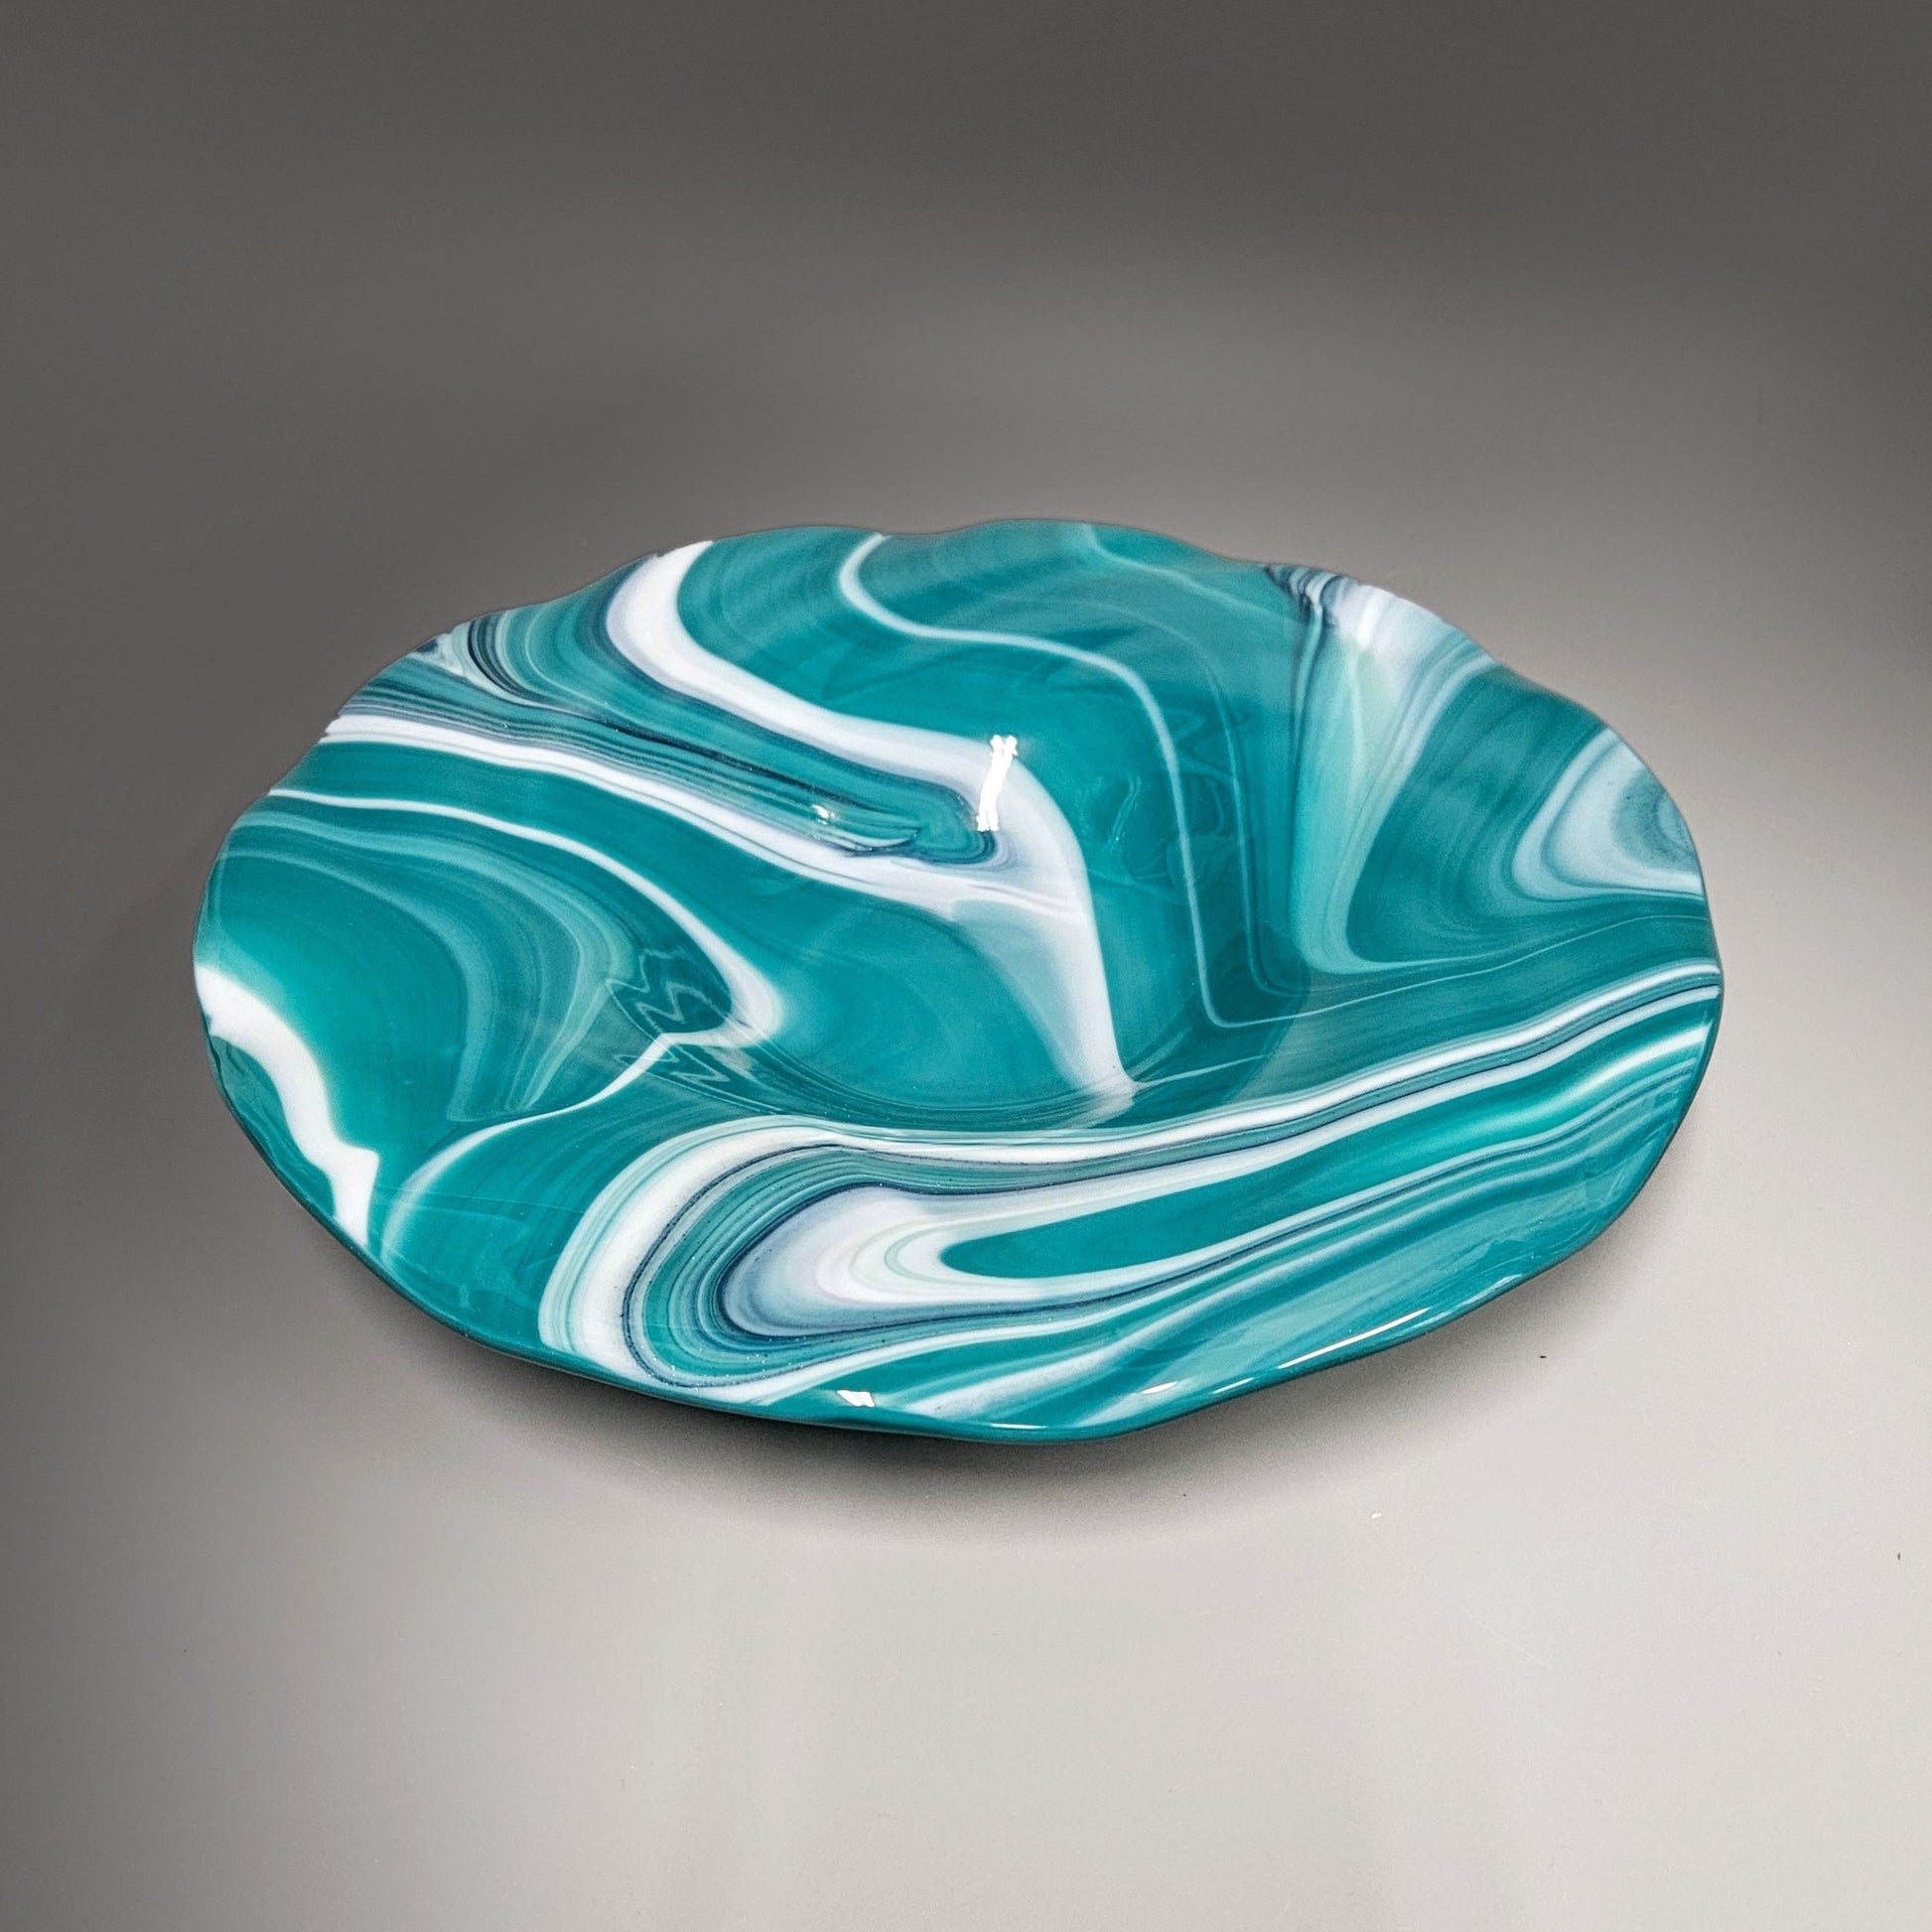 Decorative Fused Glass Art Bowl | Modern Glass Art Gifts & Home Décor